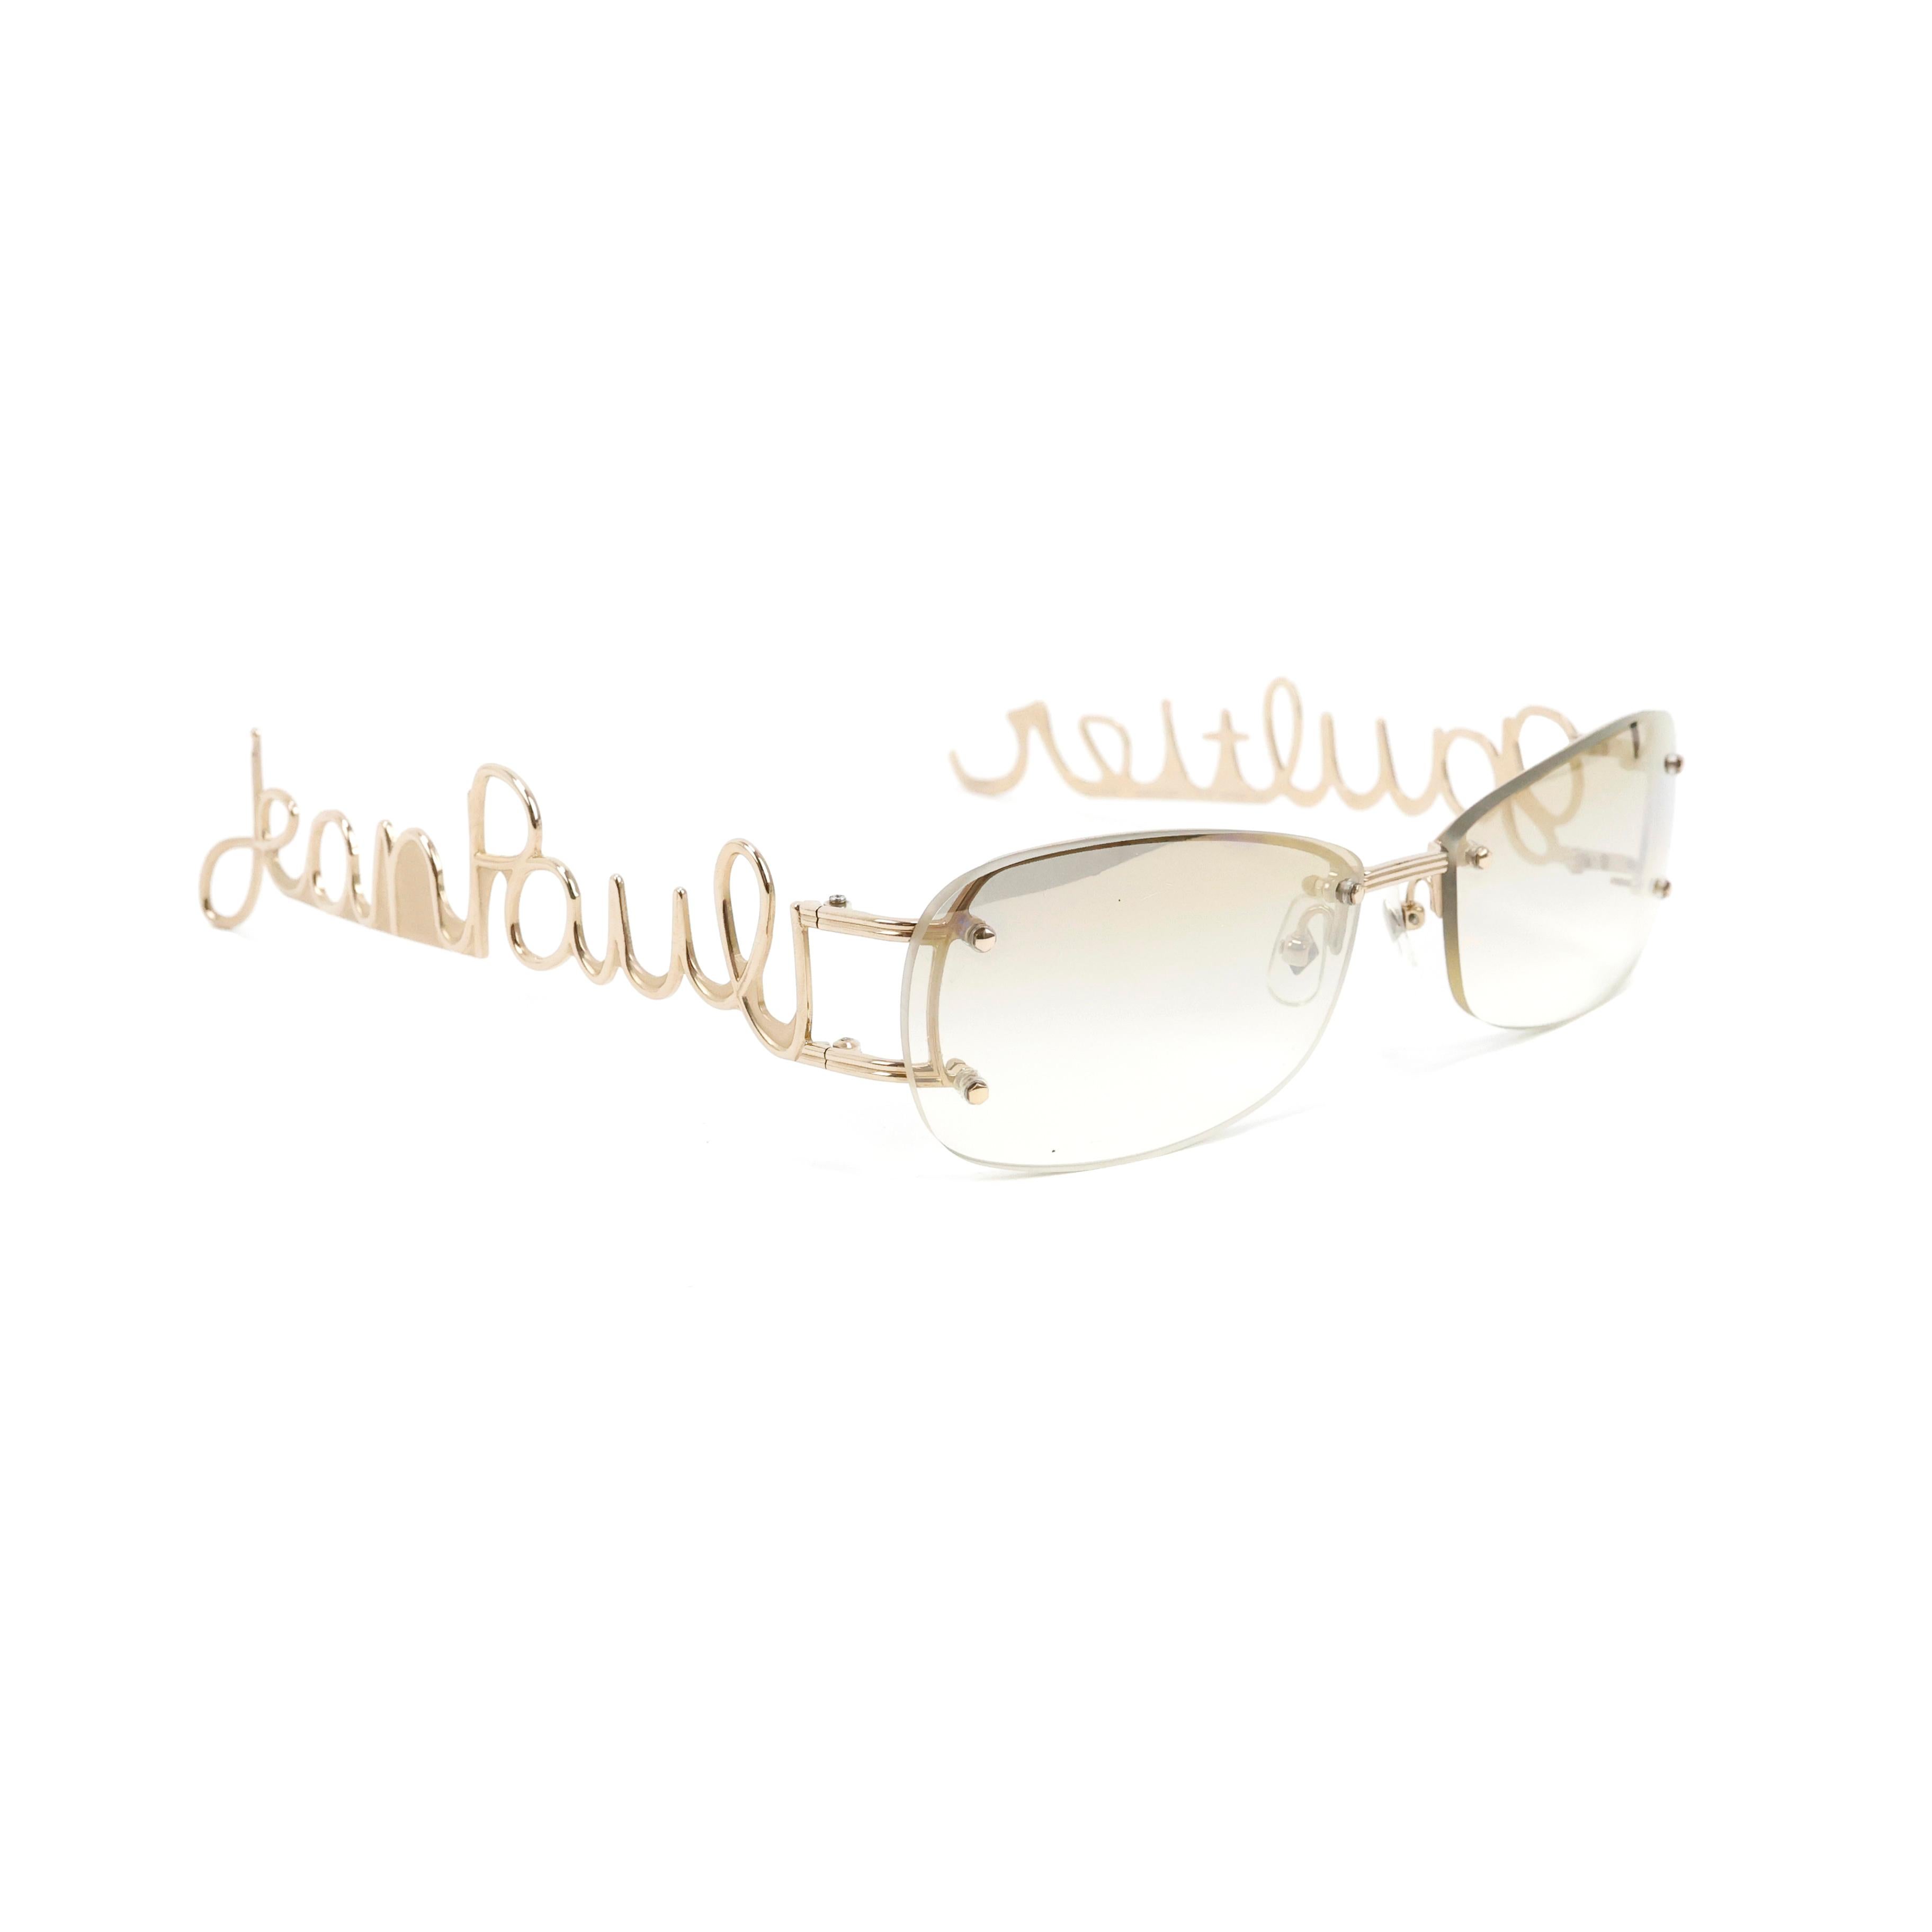 Rare Jean Paul Gaultier cursive logo sunglasses in gold.


Condition:
Really good.


Packing/accessories:
Case.